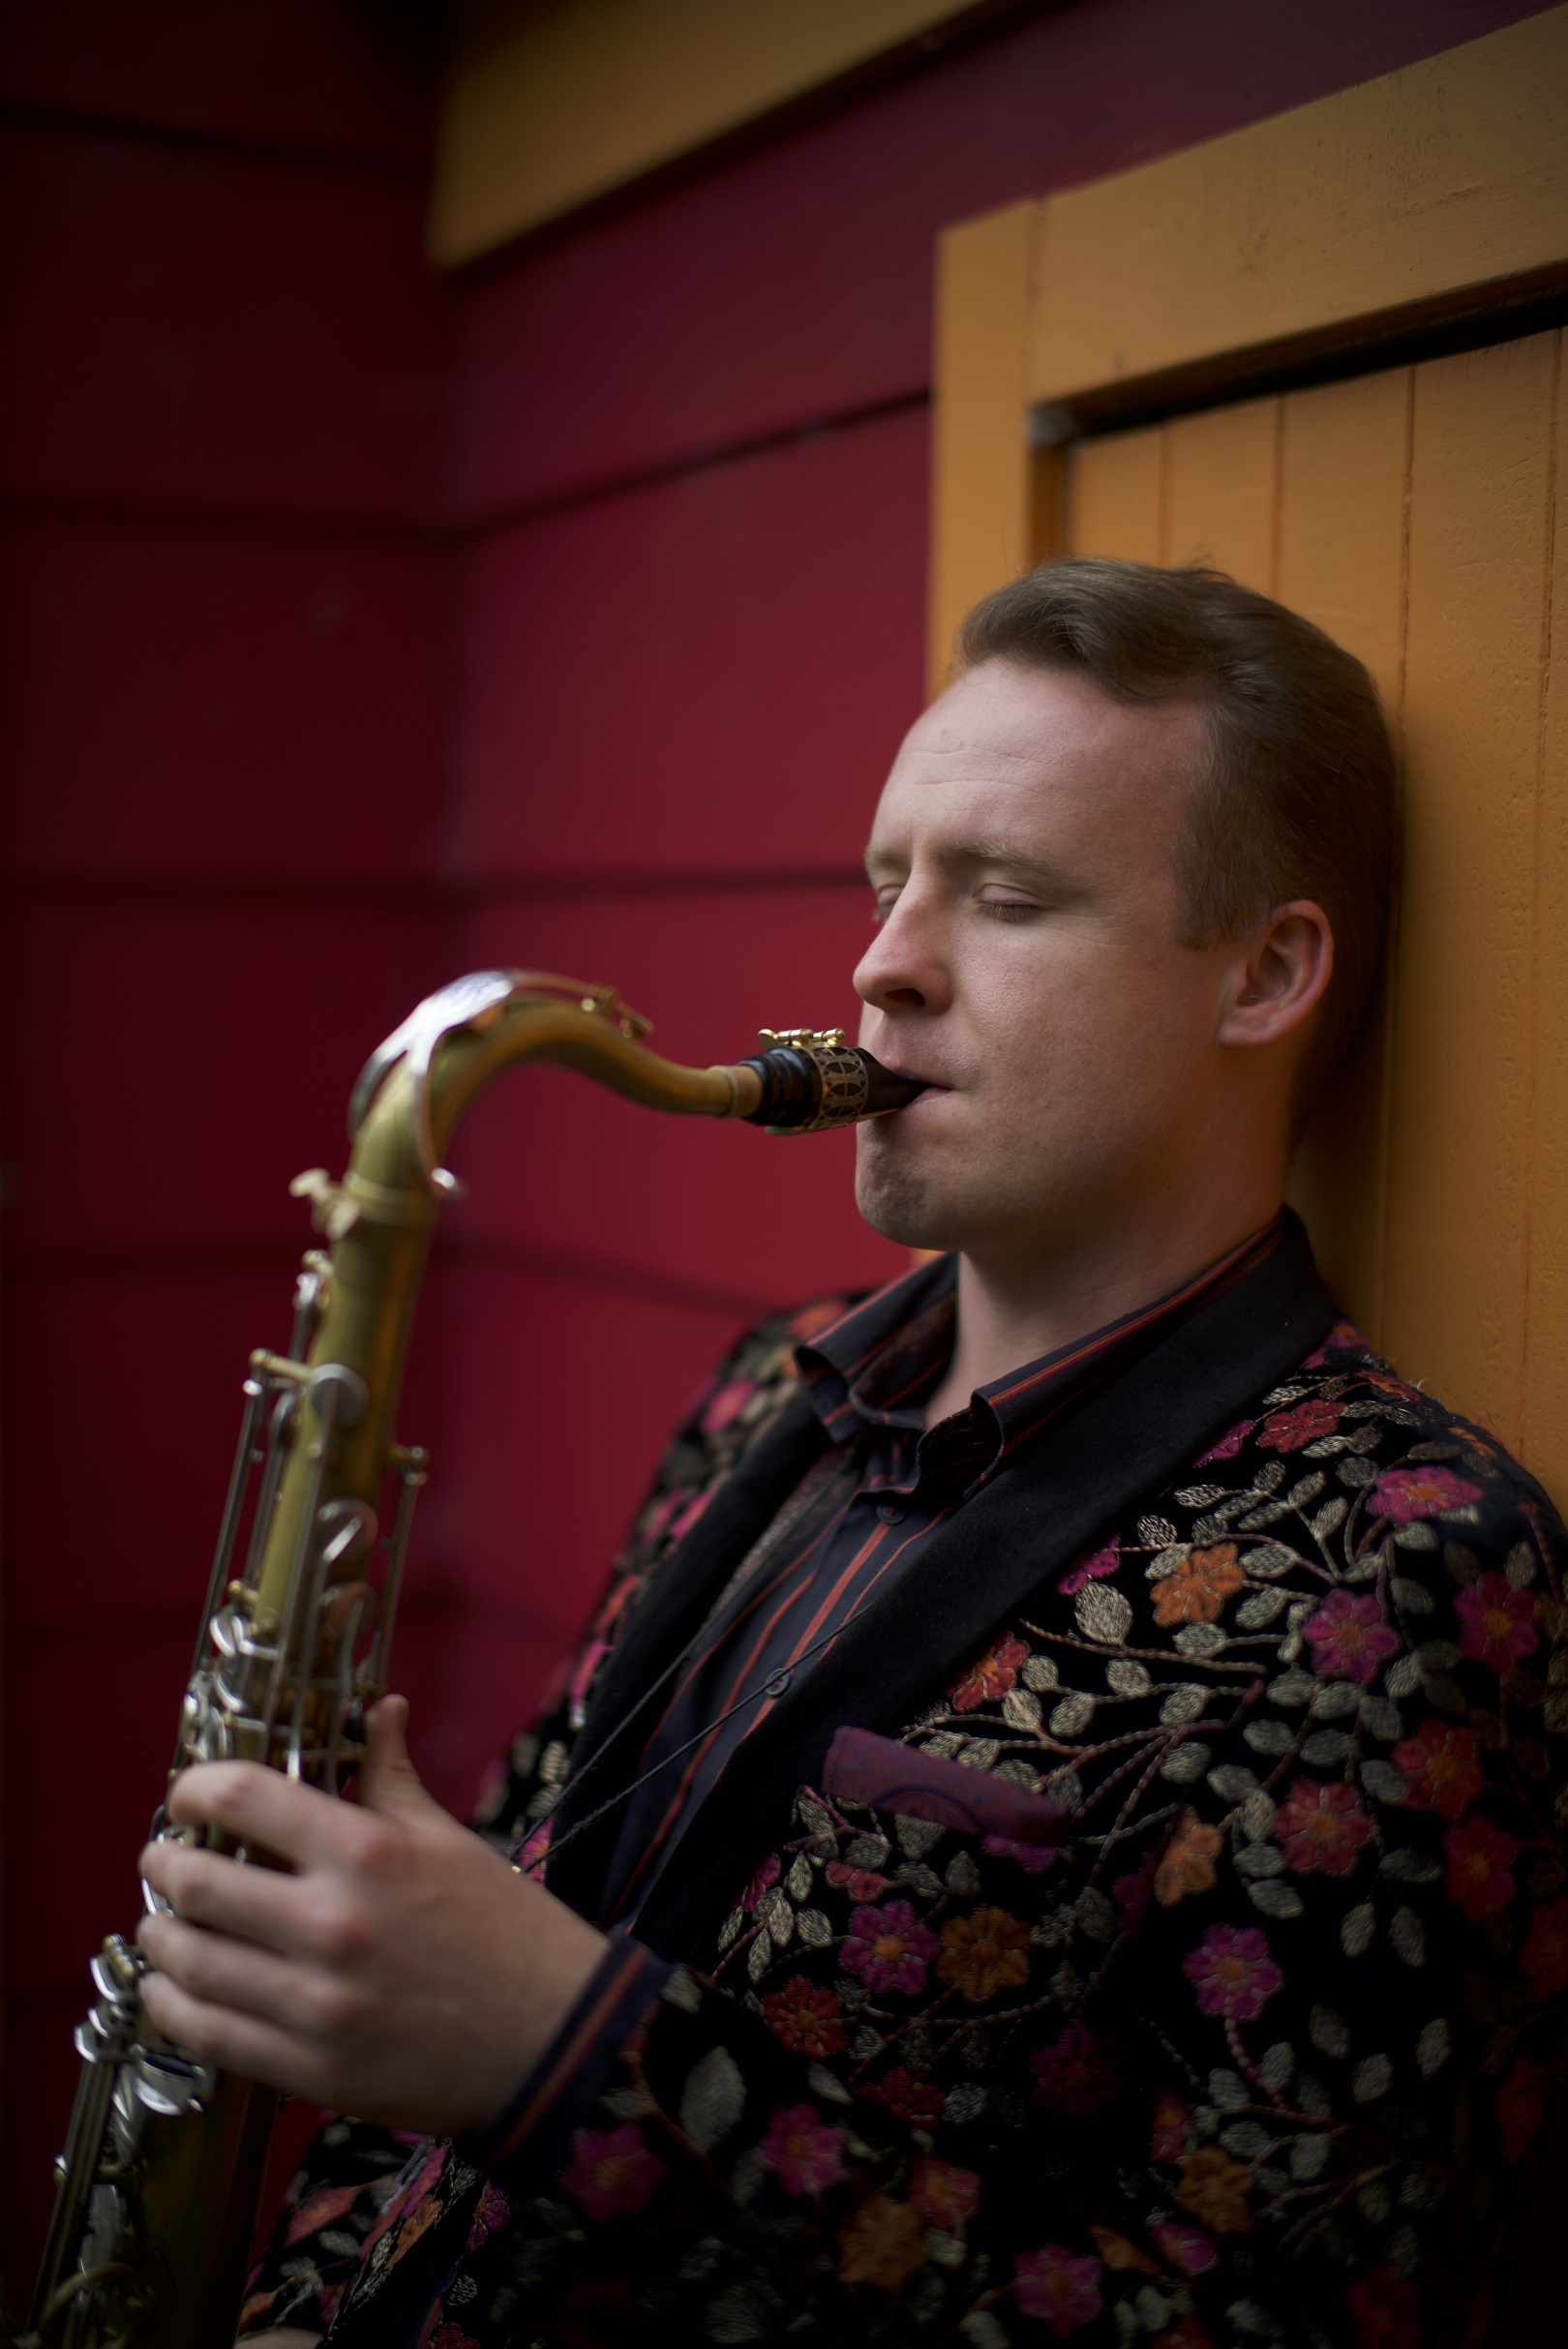 Oscar Laven is a multi-instrumentalist. The tenor saxophone is his main instrument, but he is...